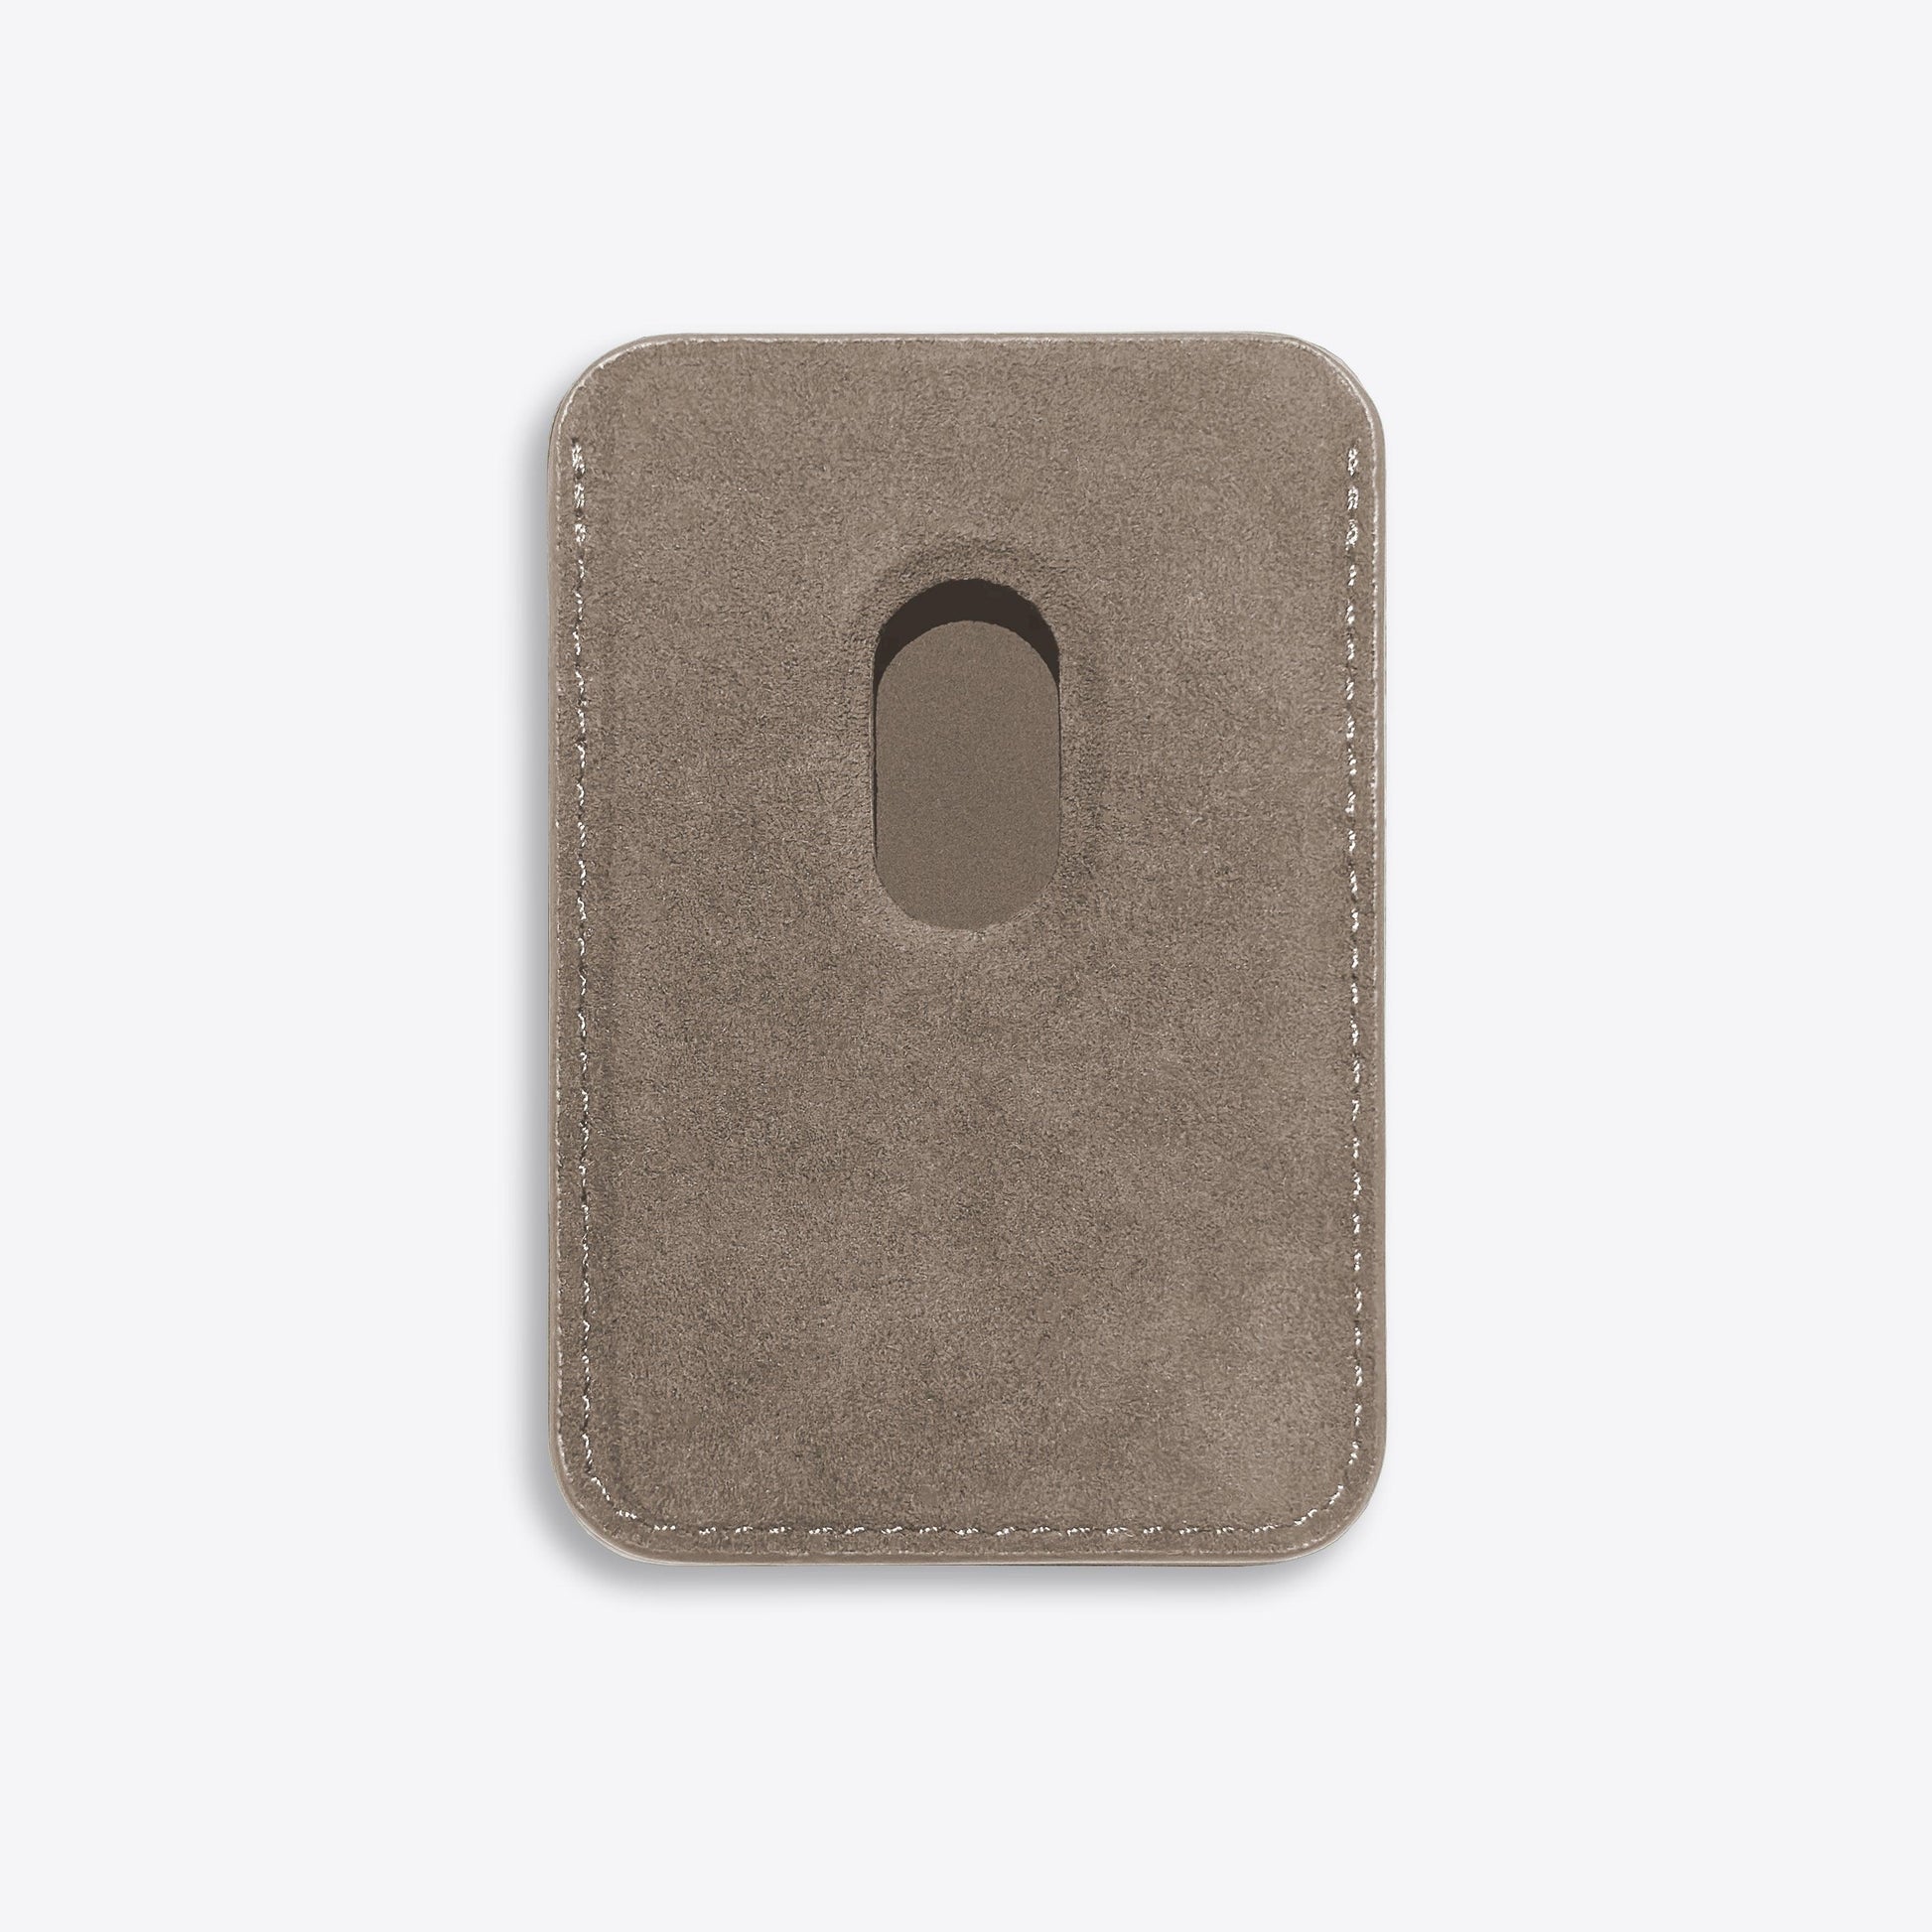 Alcantara Suede Leather iPhone Case and Accessories Collection - The Sticky Cardholder - Malibu Beige - Luriax